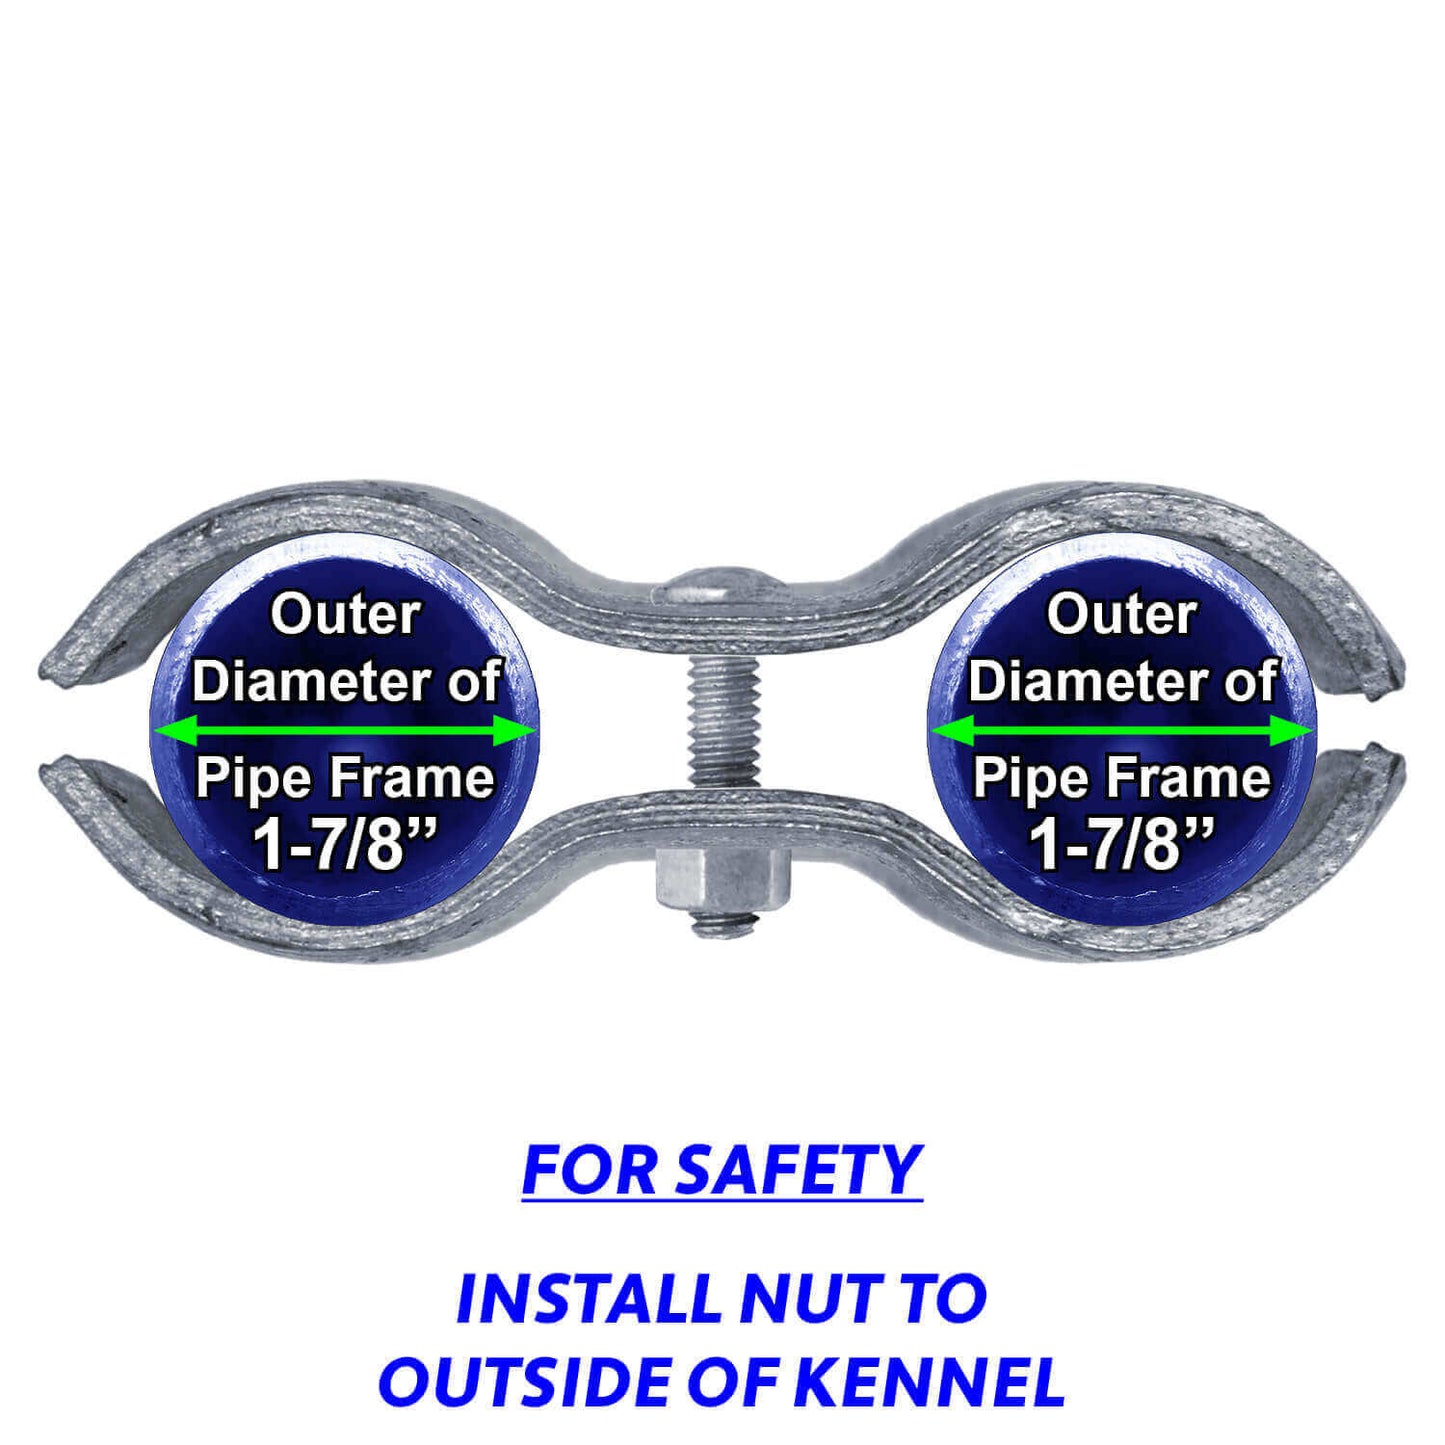 Chain Link Fence PANEL CLAMPS / KENNEL CLAMPS. Use For Dog kennels / dog runs, or temporary chain link fencing (Saddle clamps) Available sizes 1-3/8", 1-5/8" and 1-7/8" in 2 Pack and 8 Packs